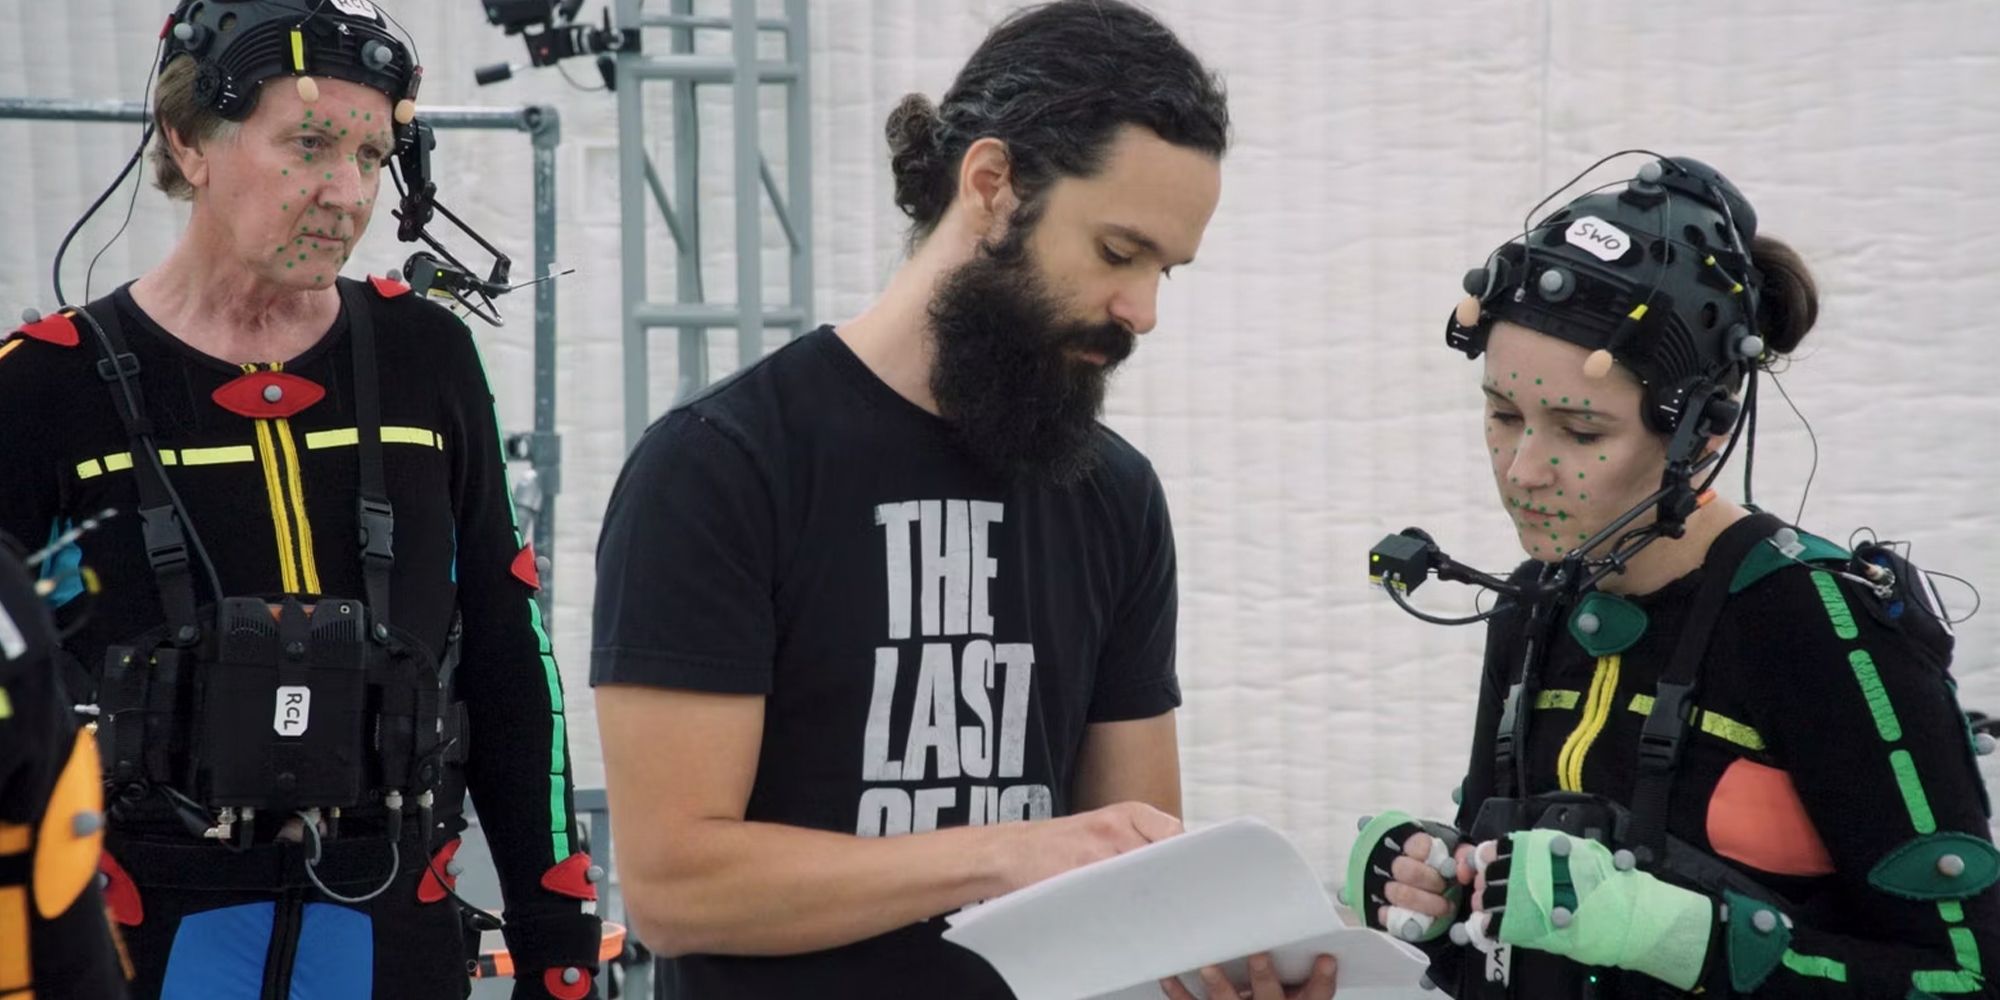 Neil Druckmann on the set of The Last of Us Part 2 with two actors in mocap suits, reading a script